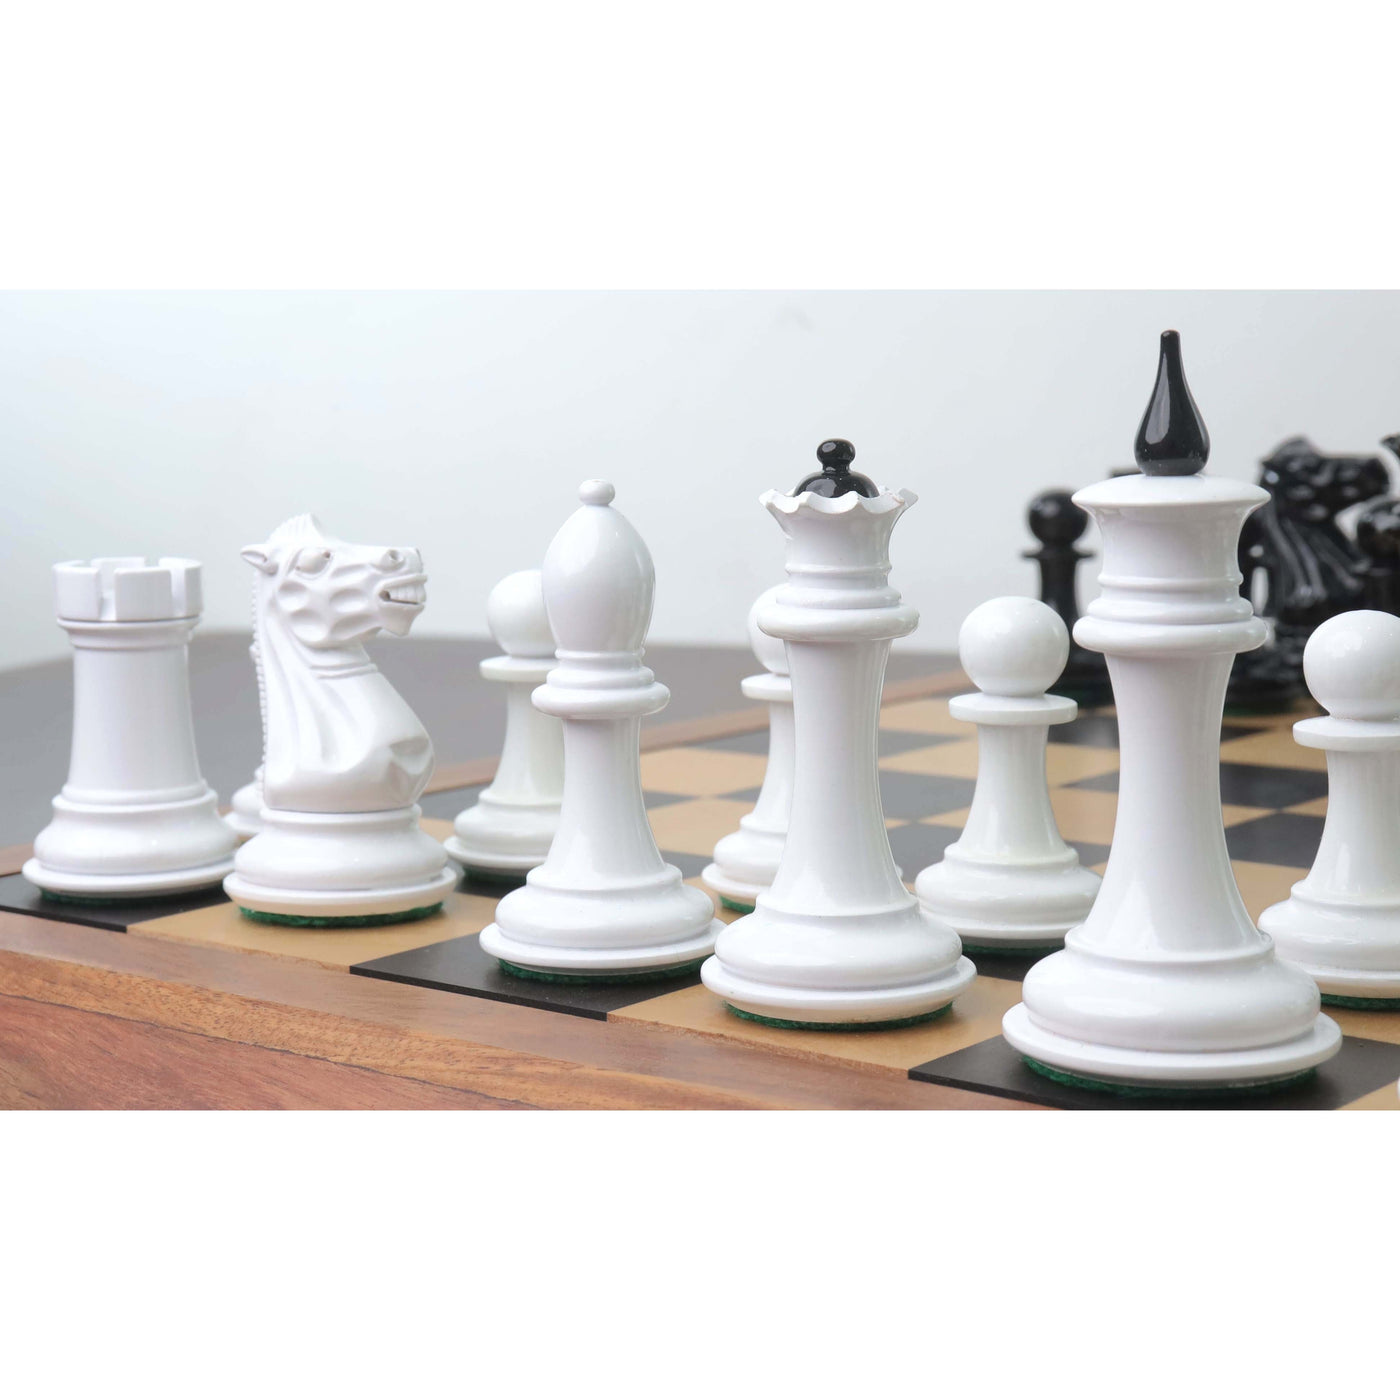 Slightly Imperfect 1940s' Soviet Reproduced Chess Set - Chess Pieces Only - Black and White Lacquer Boxwood